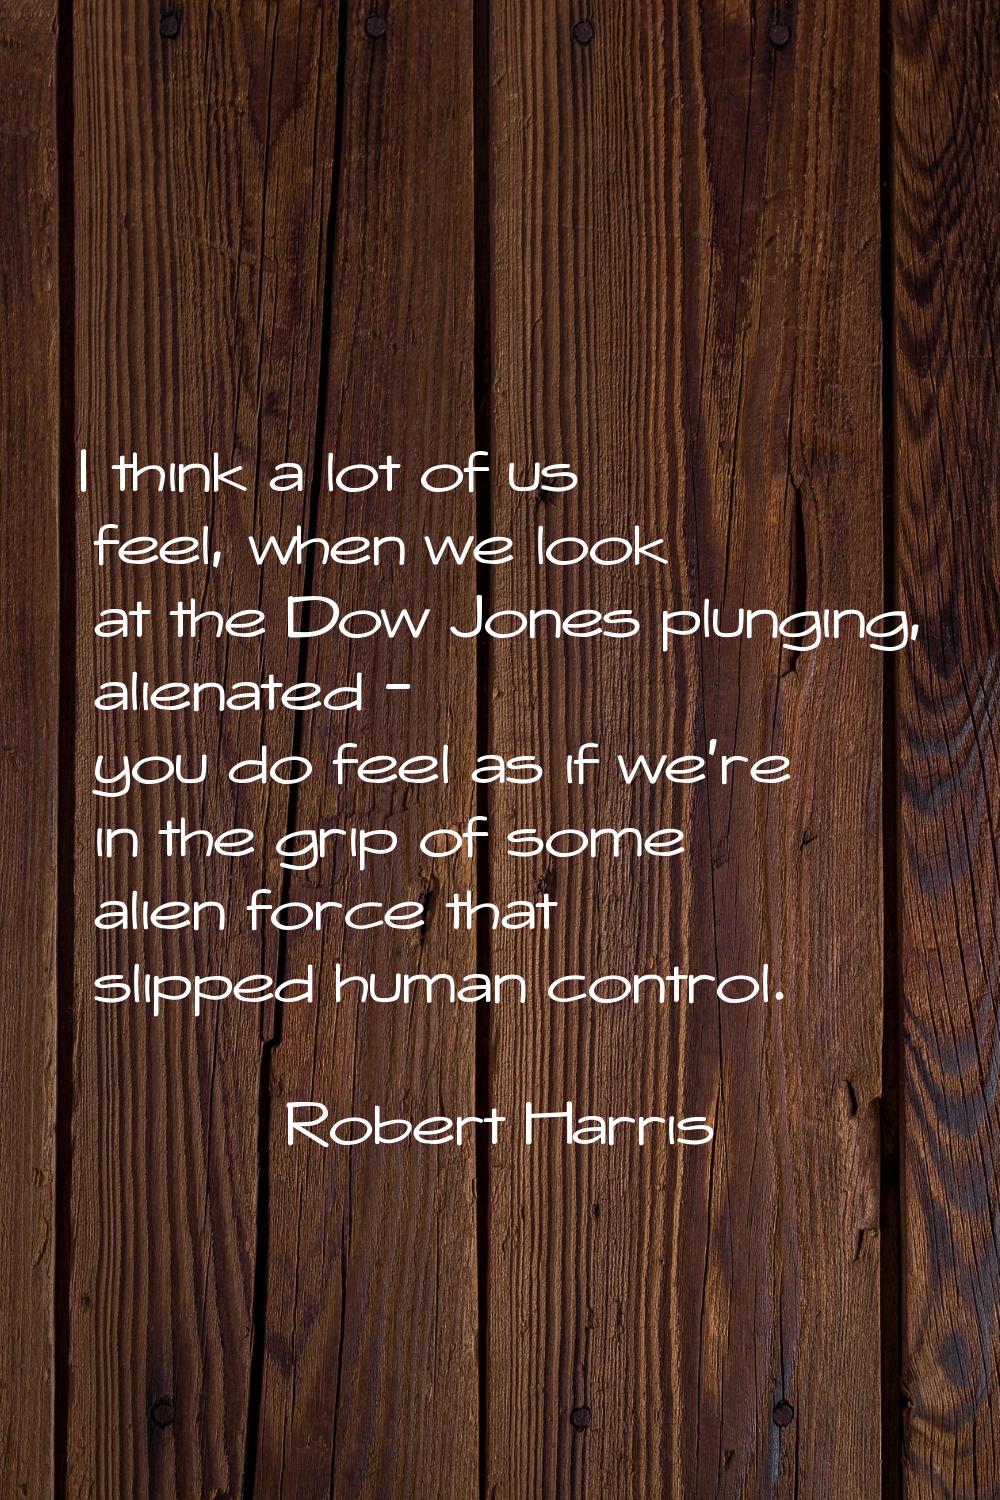 I think a lot of us feel, when we look at the Dow Jones plunging, alienated - you do feel as if we'